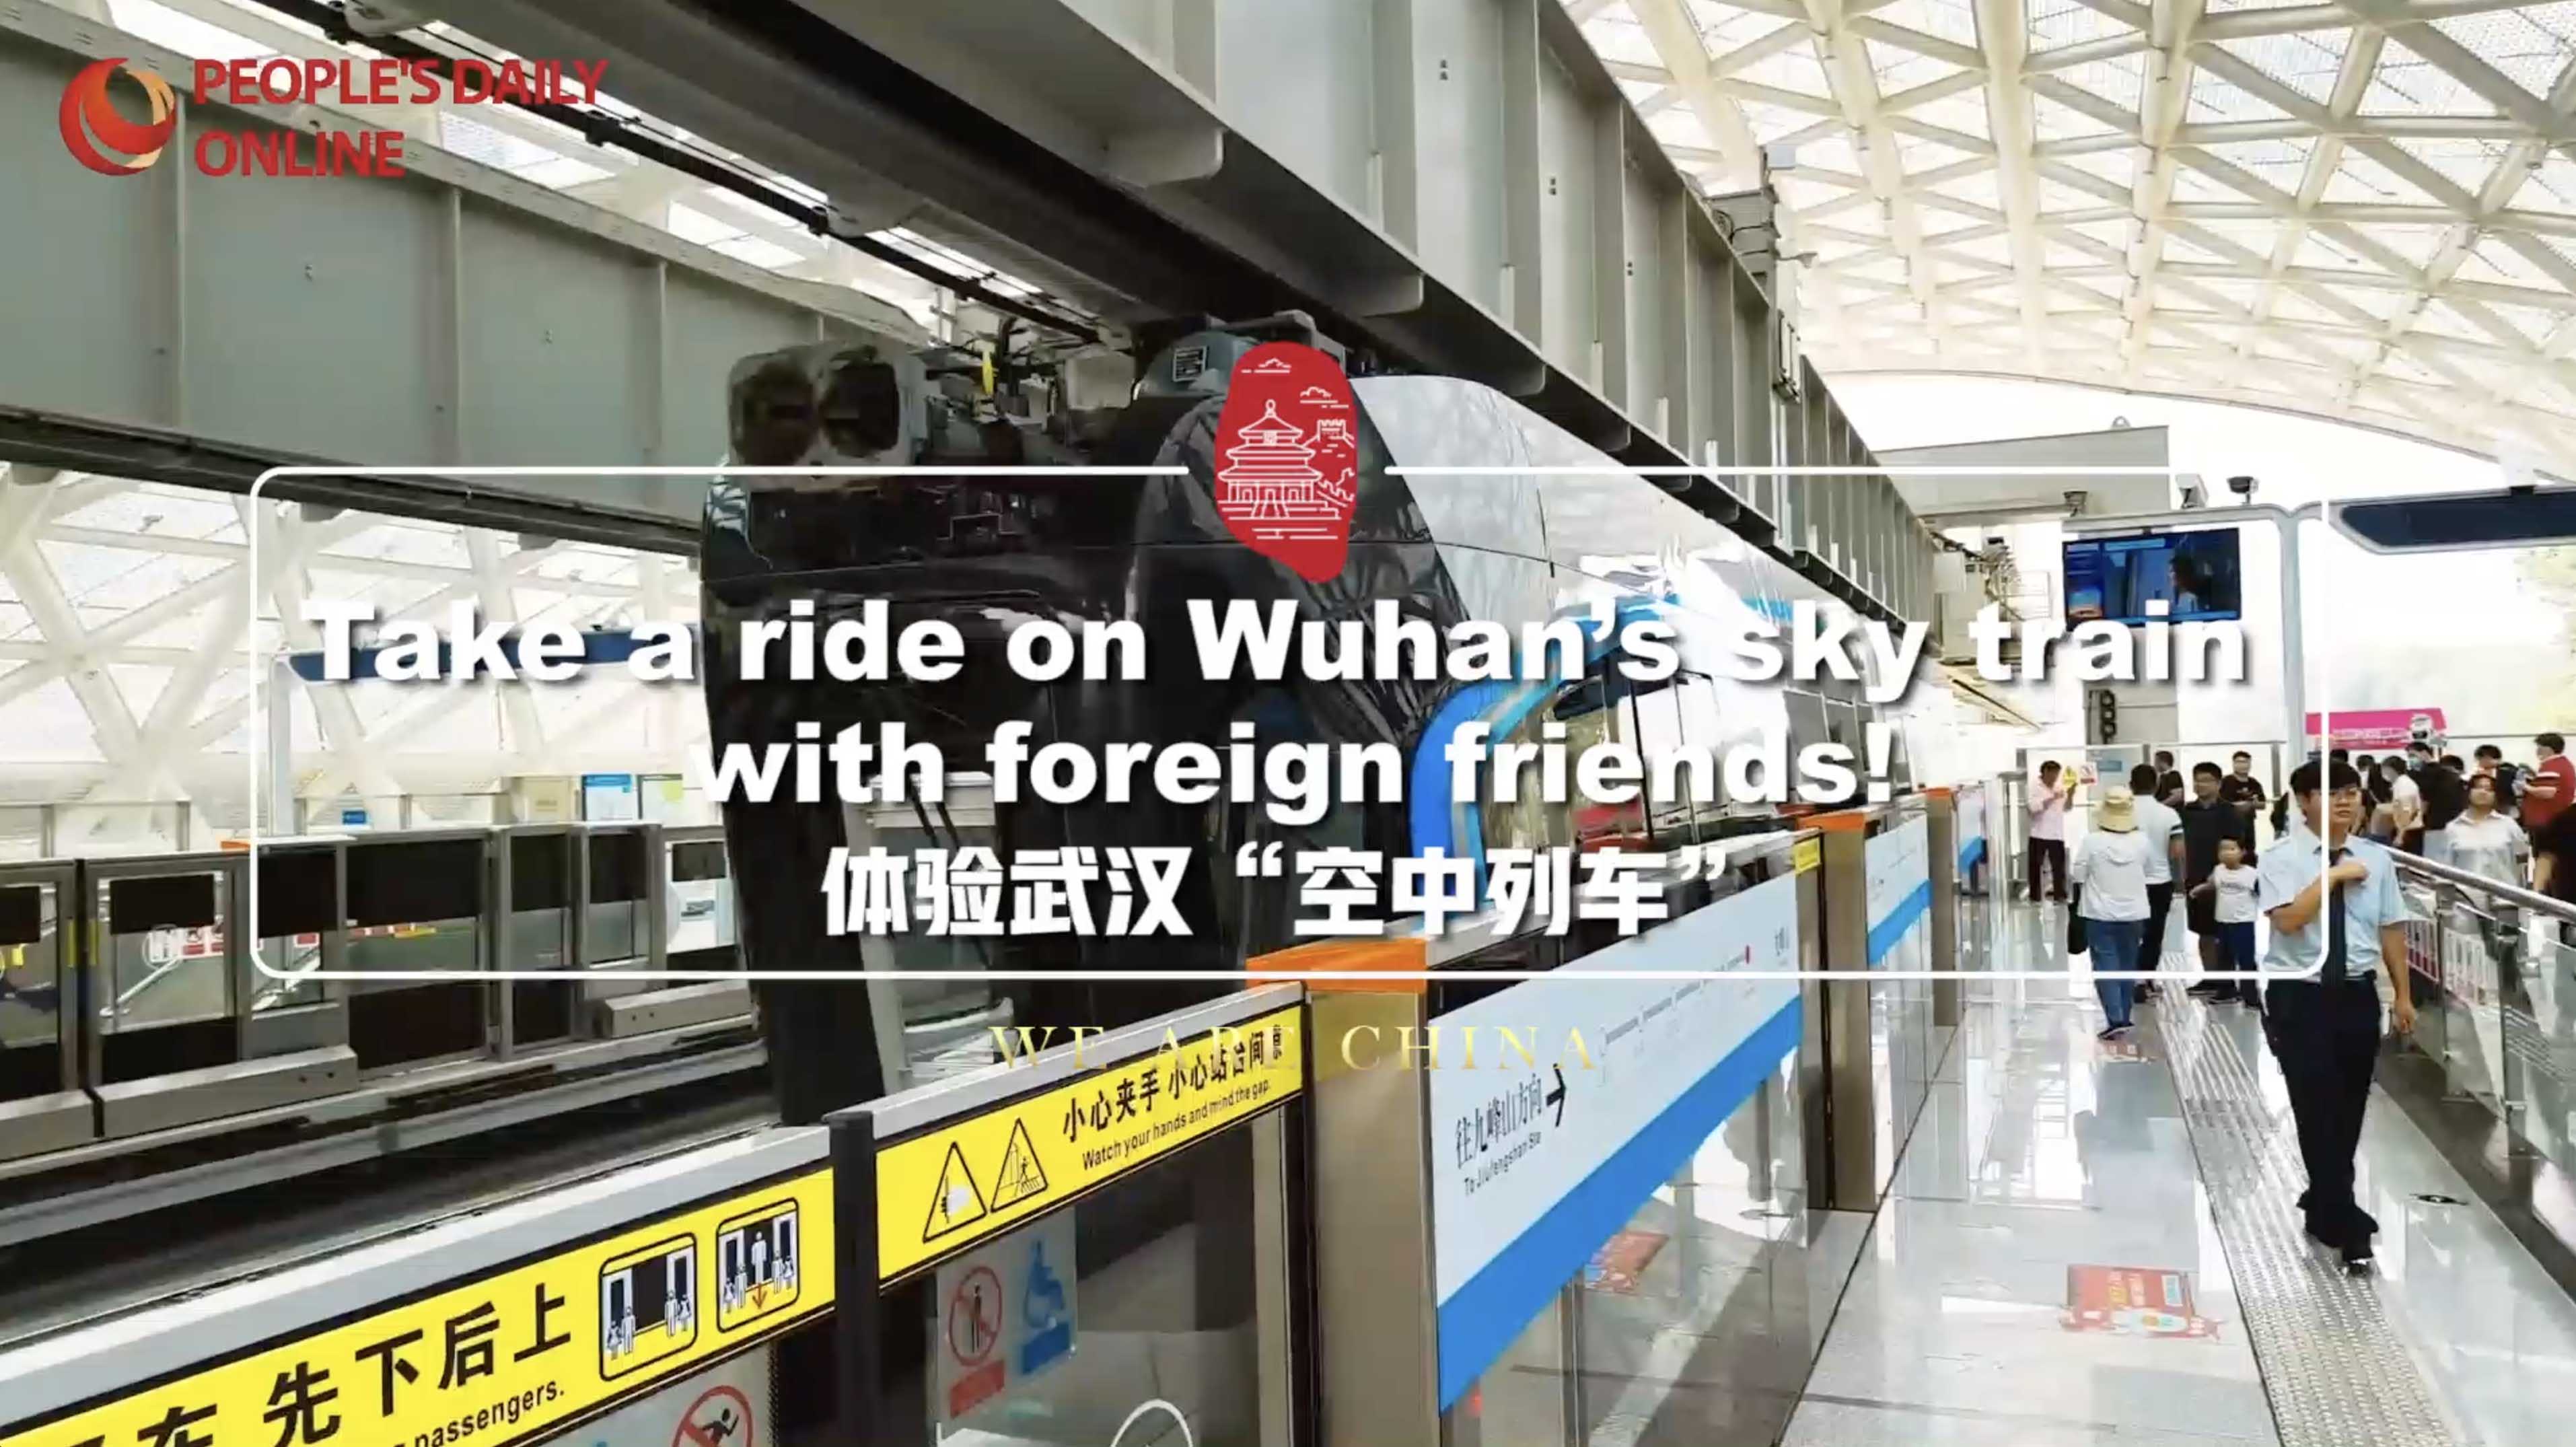 Take a ride on Wuhan's sky train with foreign friends